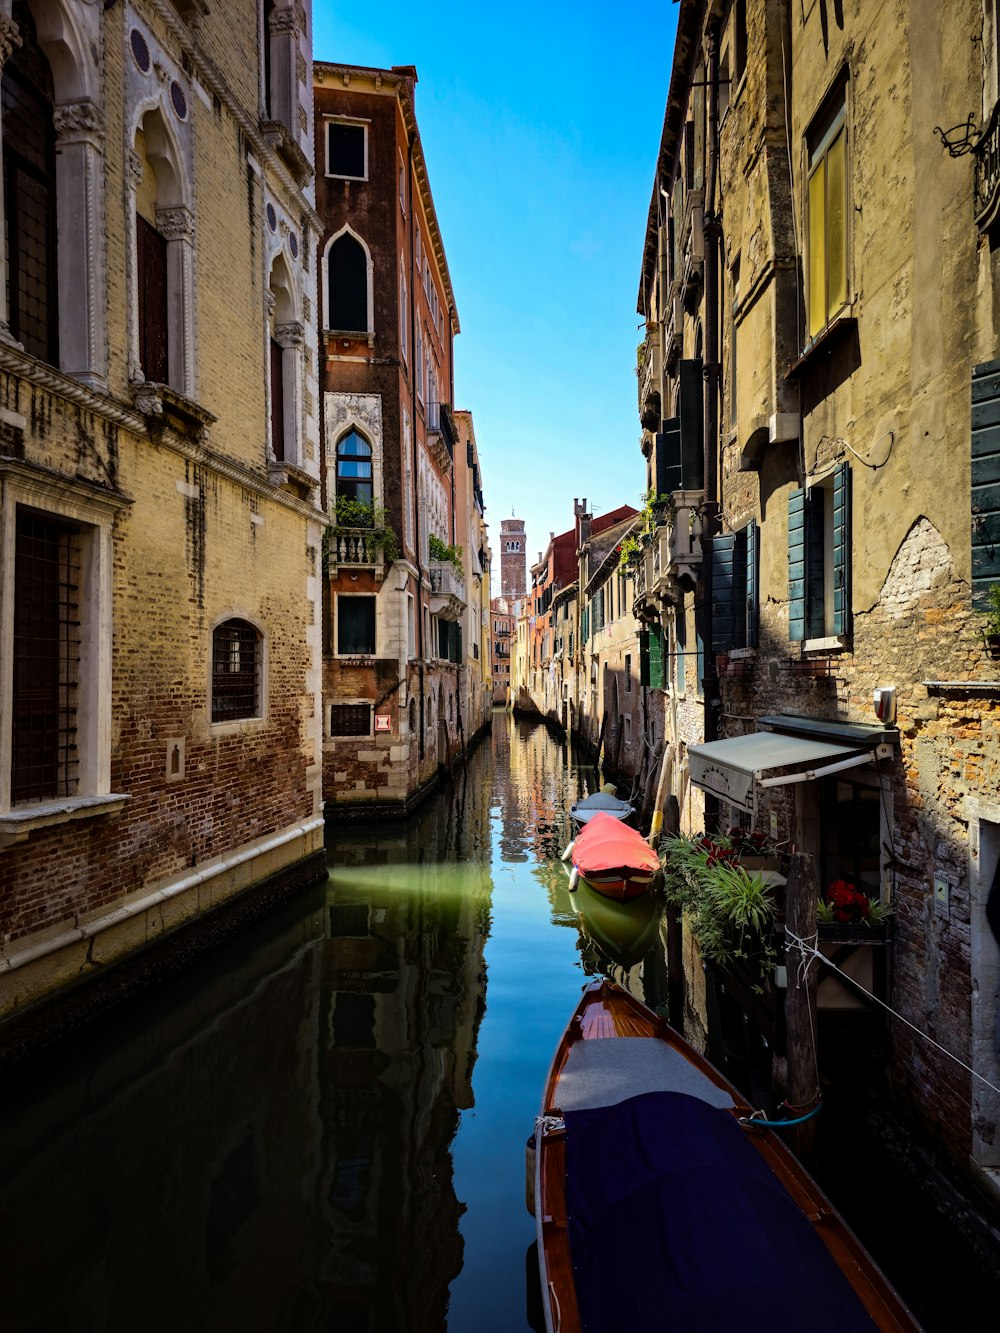 a narrow canal with a row of buildings on either side